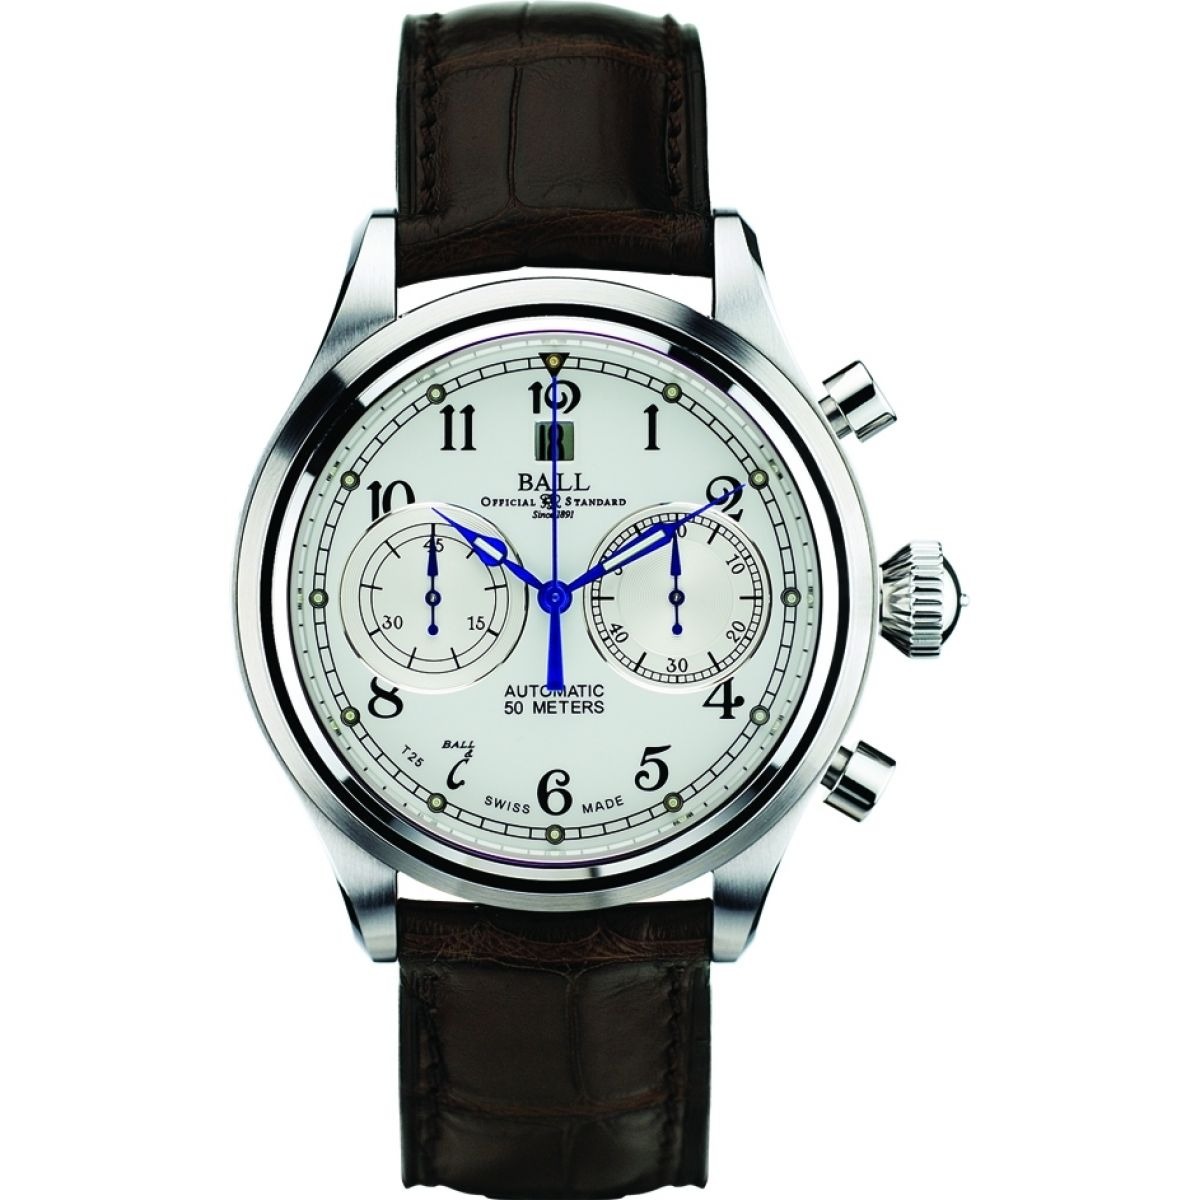 Watch Shop Chronograph Watch in White for Man from Ball GOOFASH